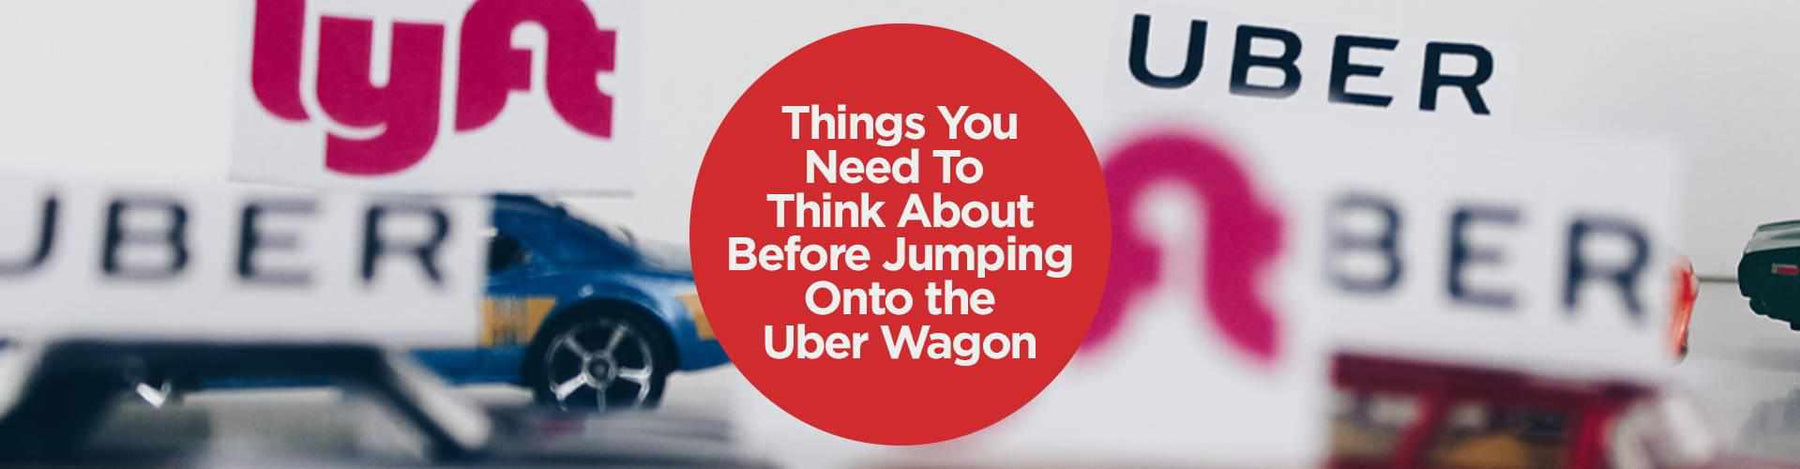 Things You Need To Think About Before Jumping Onto the Uber Wagon - - BlackboxMyCar